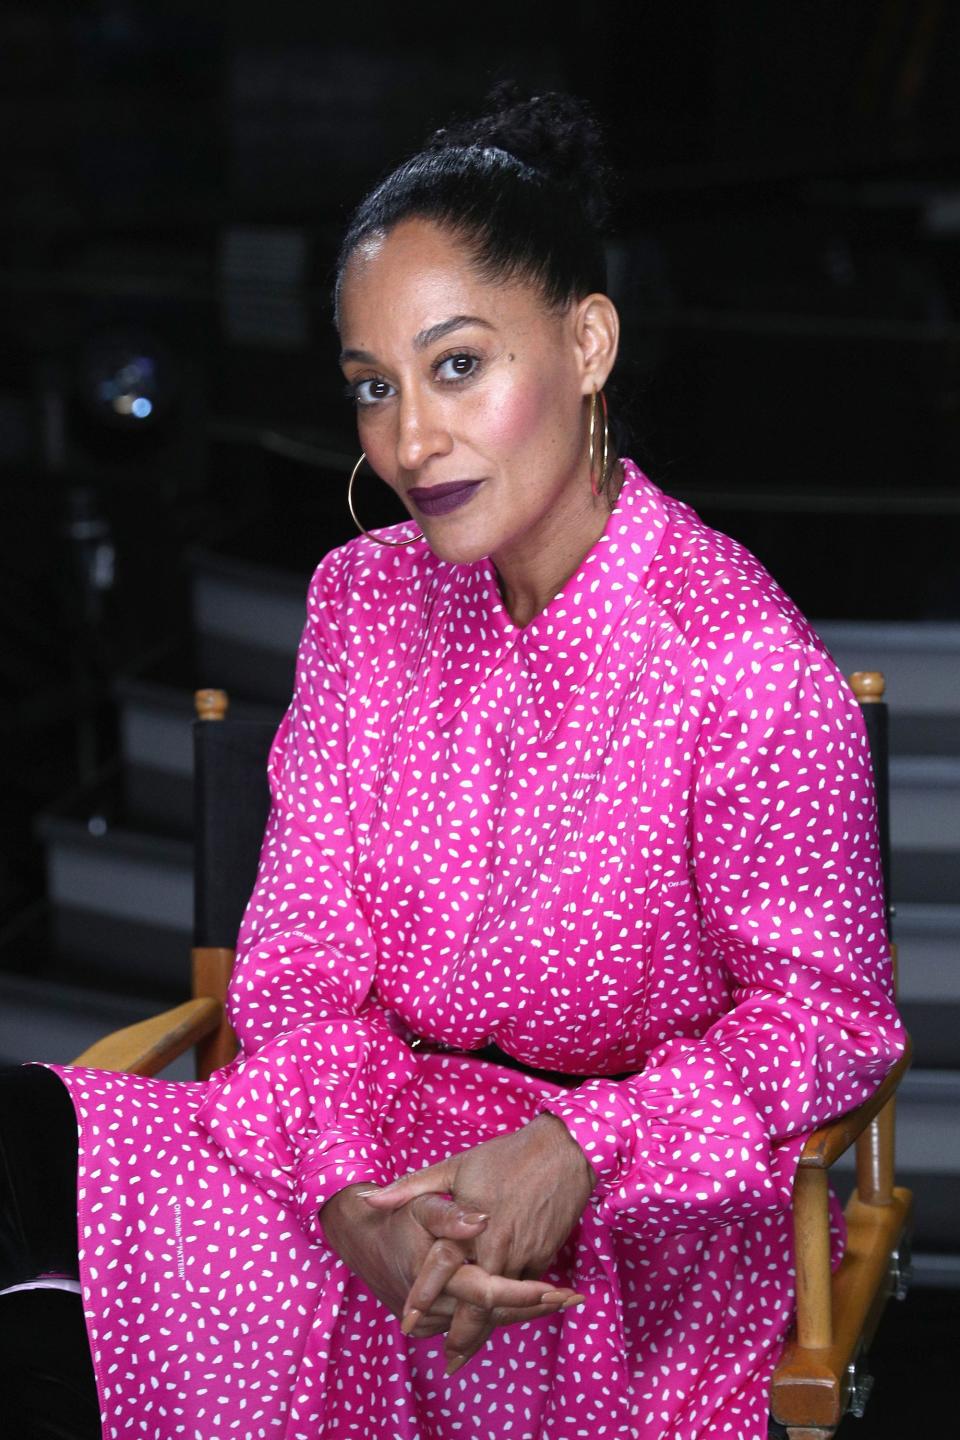 <p>WHO: Tracee Ellis Ross</p> <p>WHERE: American Music Awards press event, Los Angeles</p> <p>WHEN: November 16, 2017</p>